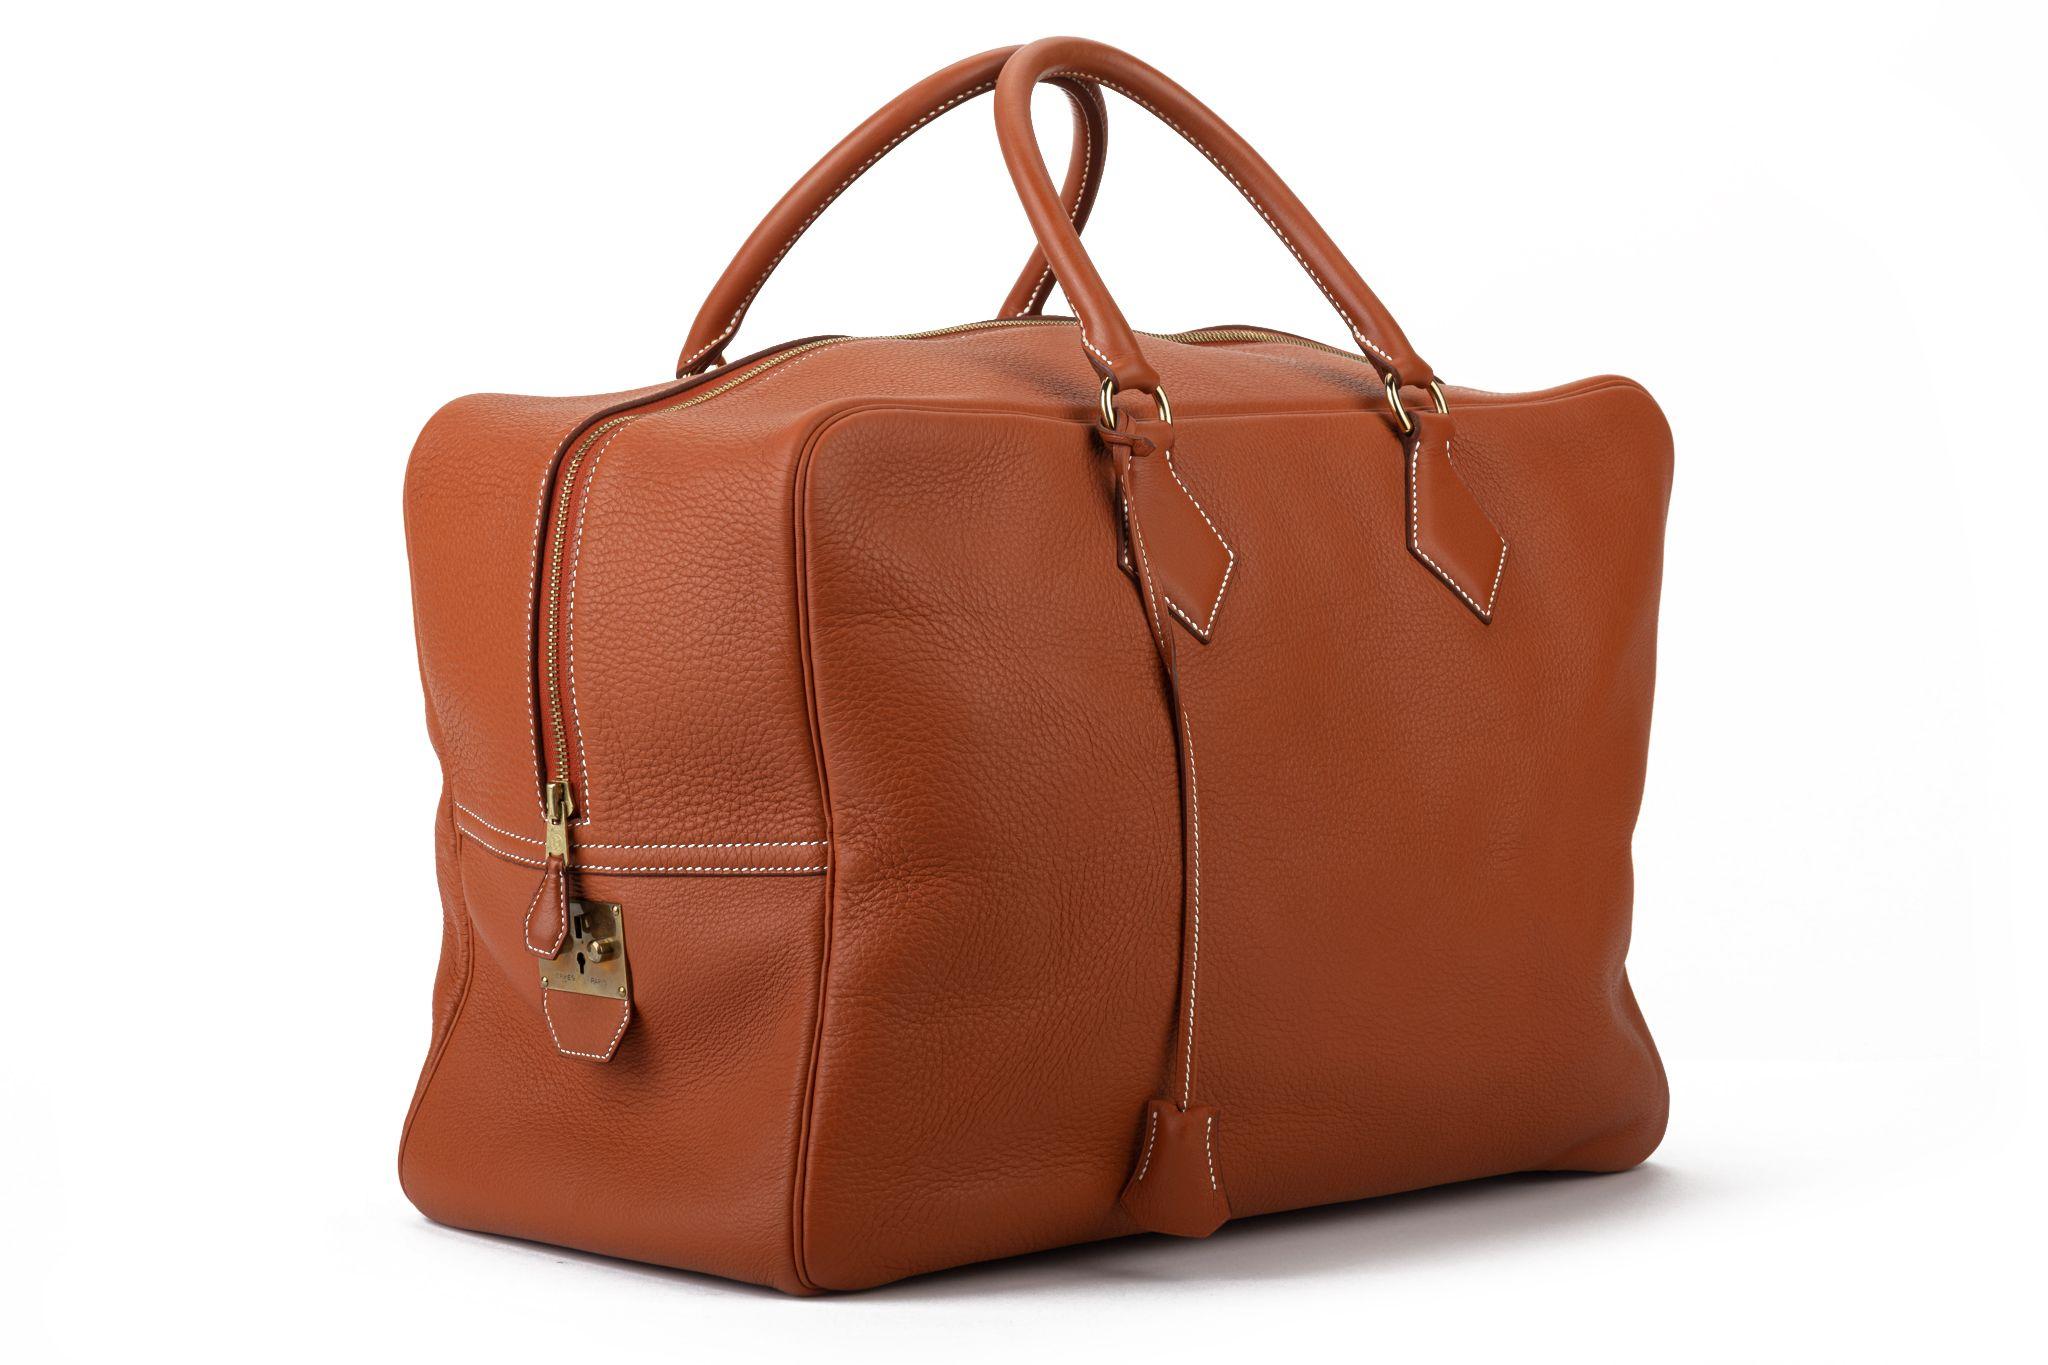 Hermès Victoria weekender bag in rust leather and gold tone hardware. Handle drop 5”. Date stamp A for 1997. Comes with key and generic dust cover .